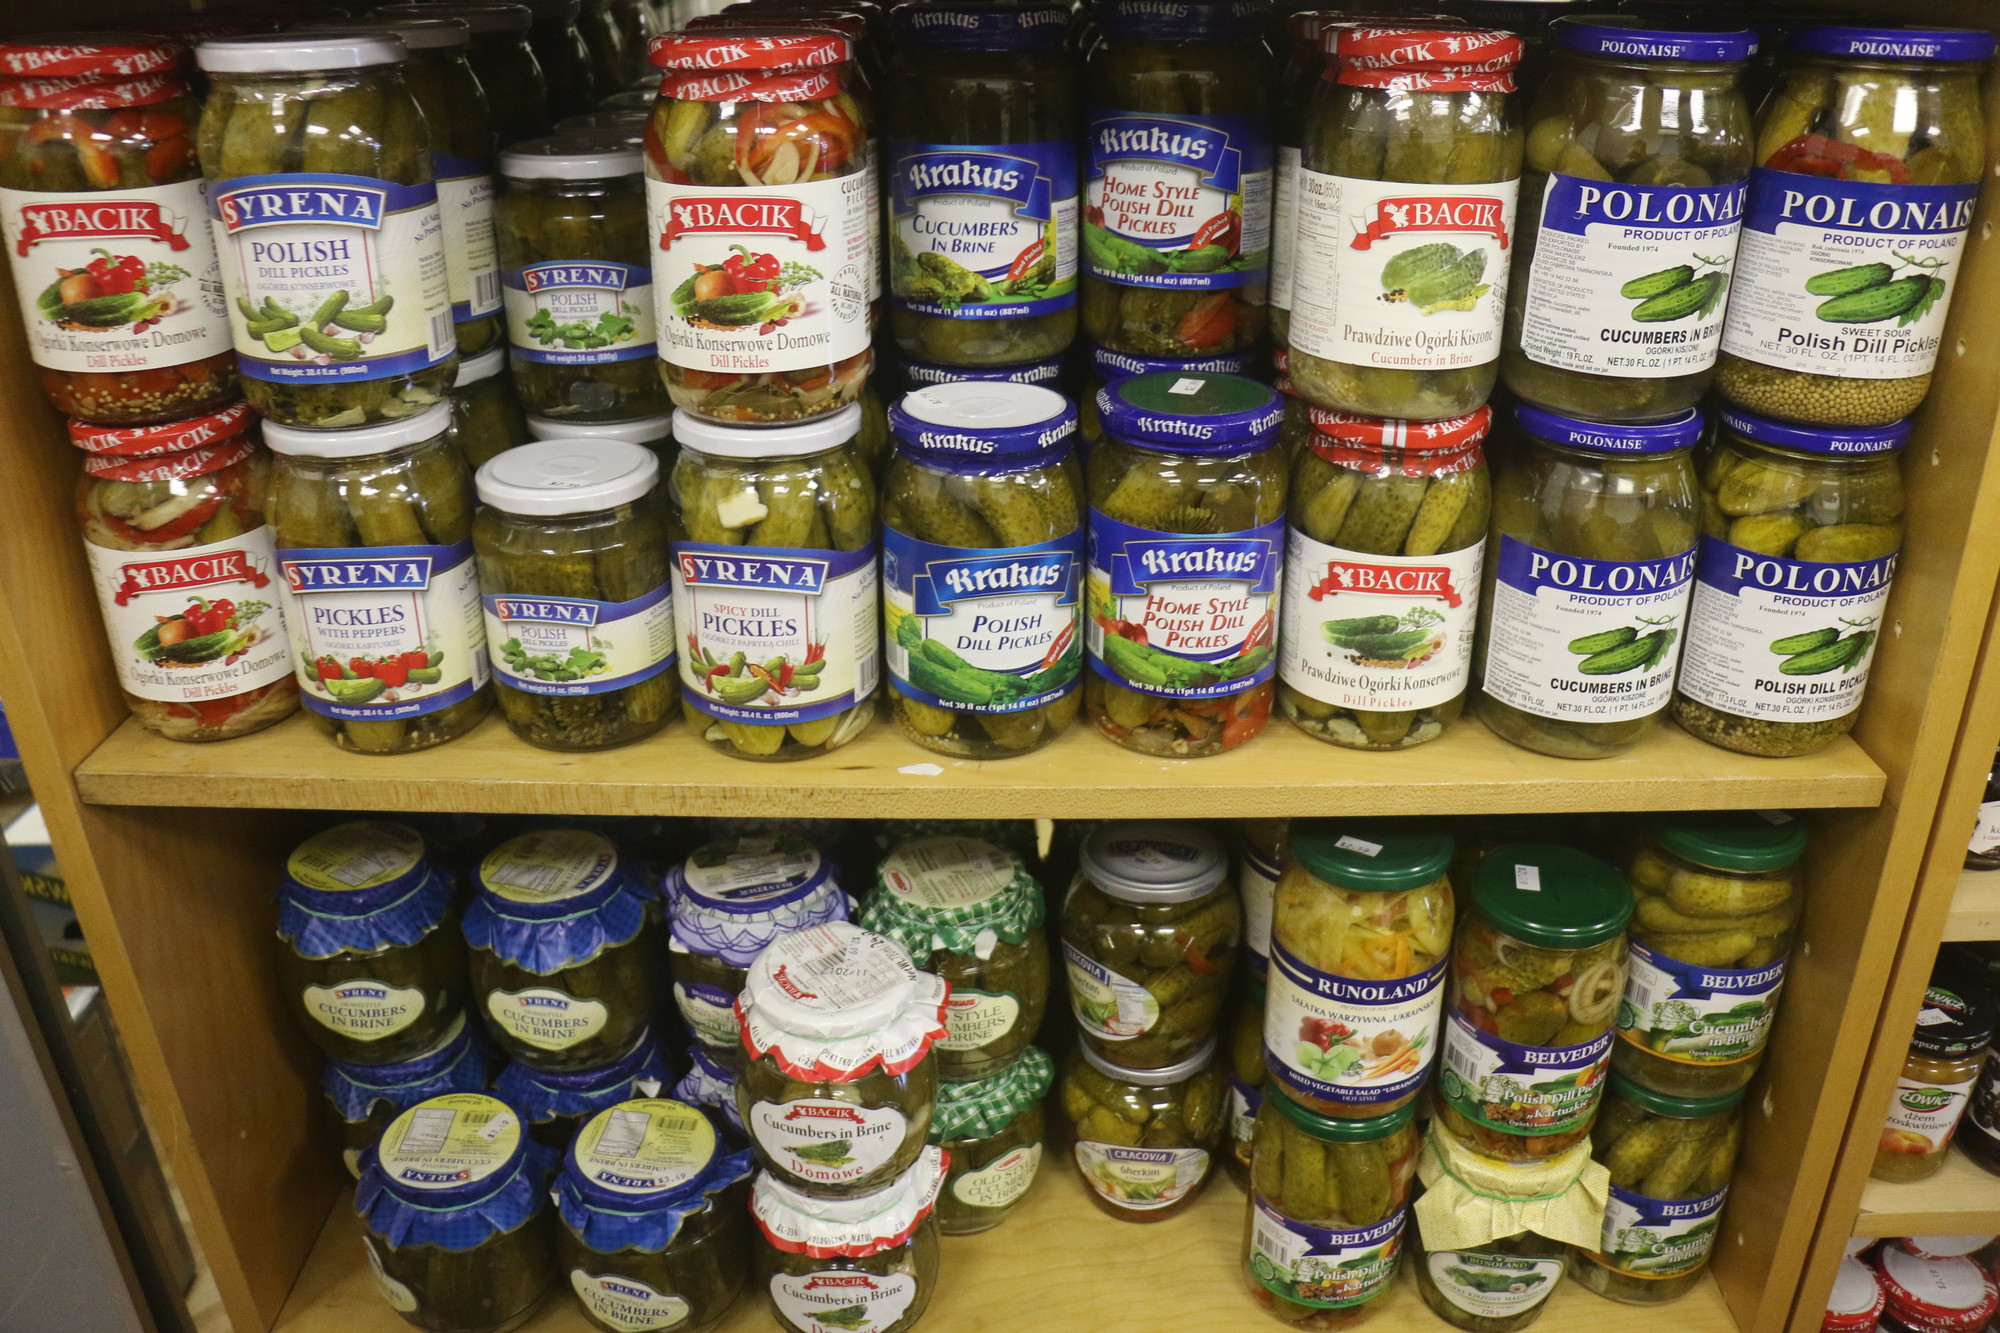 Assorted pickles fill the shelves at the back of the store.